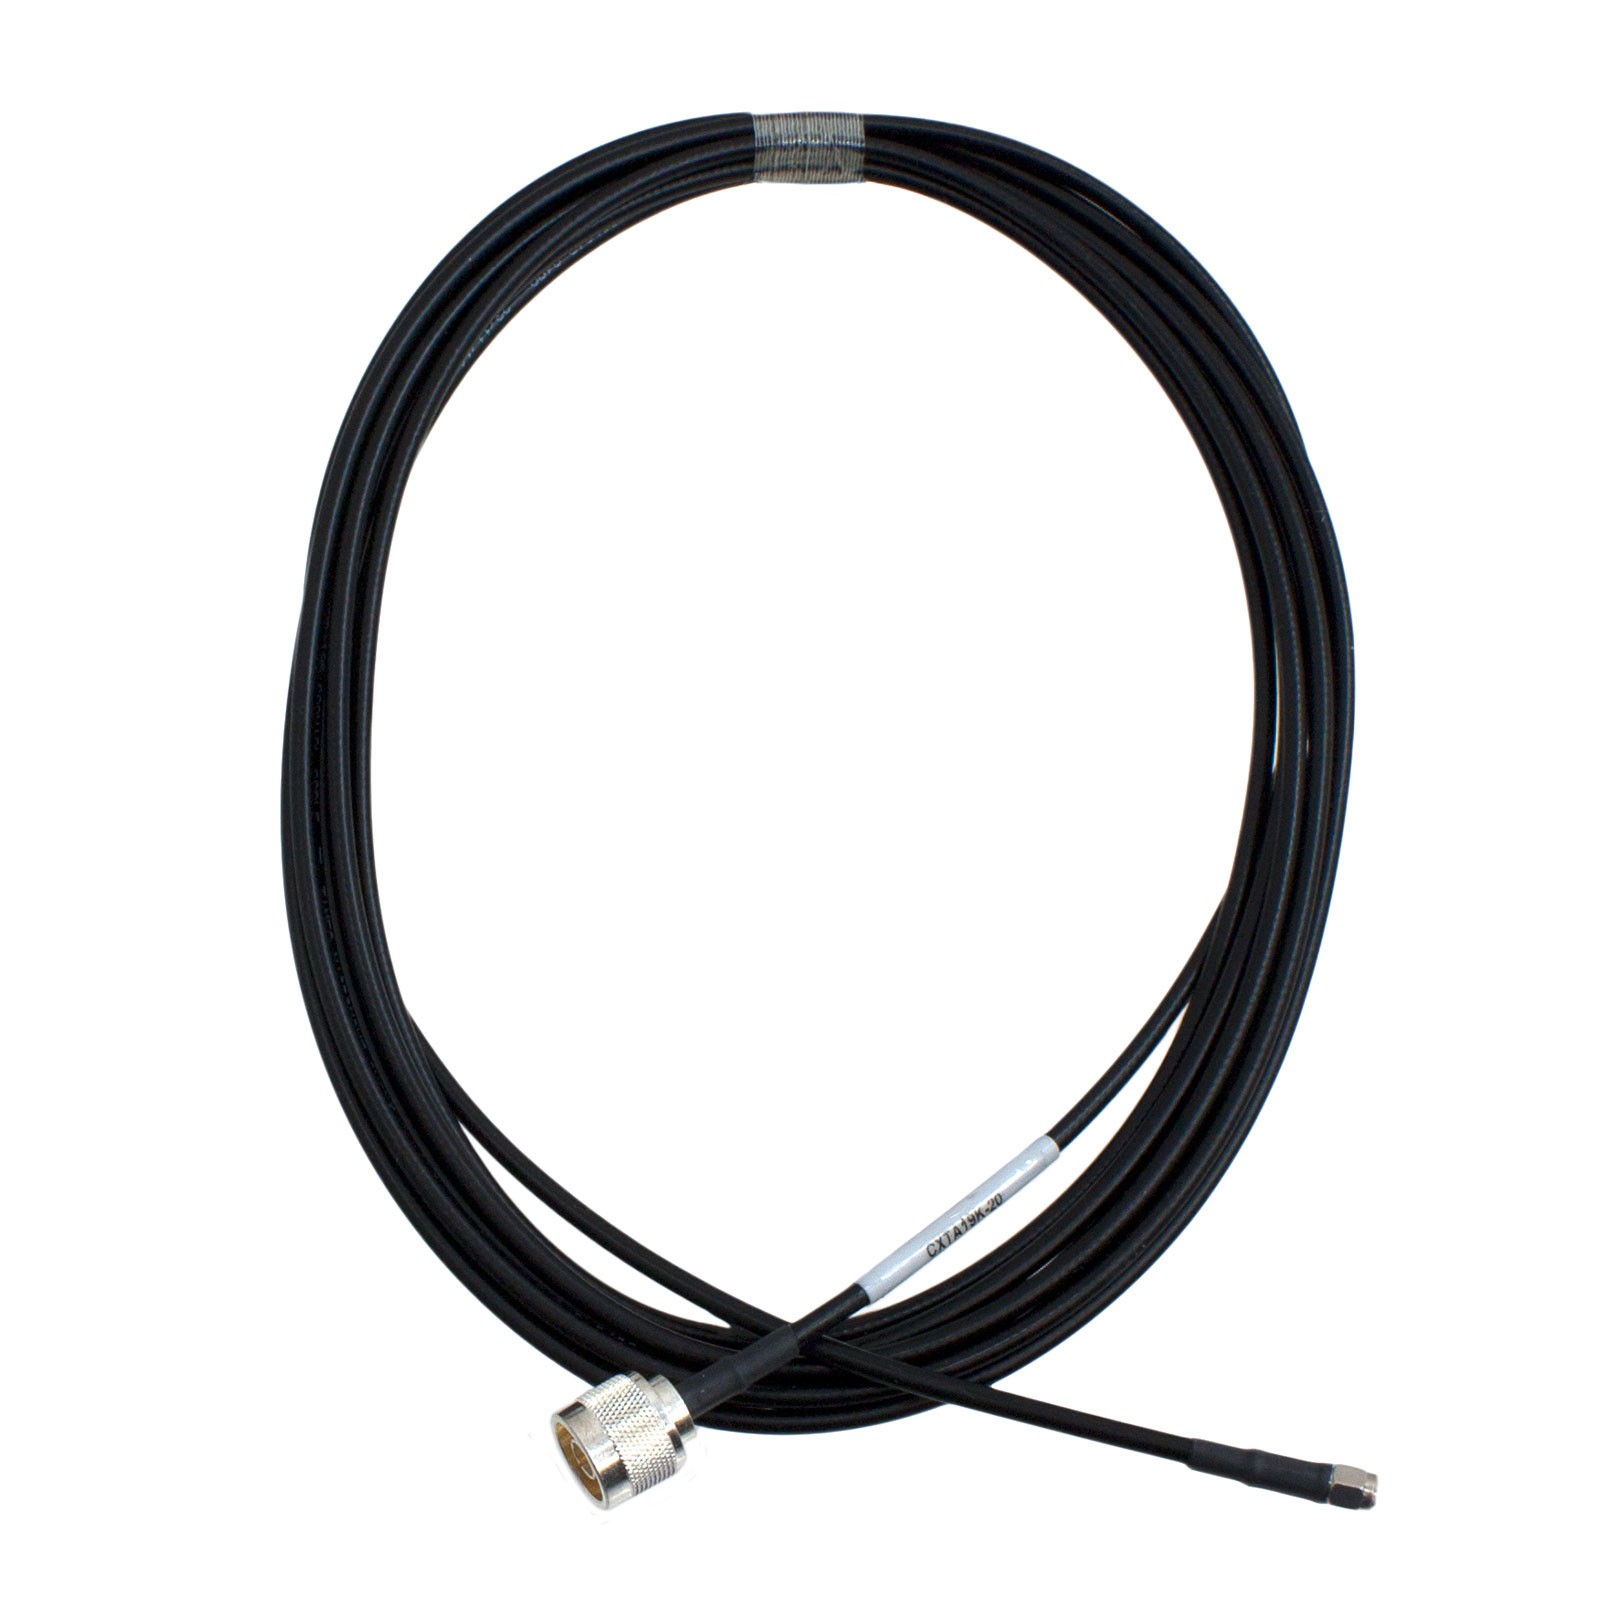 Cable d'antenne ford fiesta 2010/2019 reference 1766995